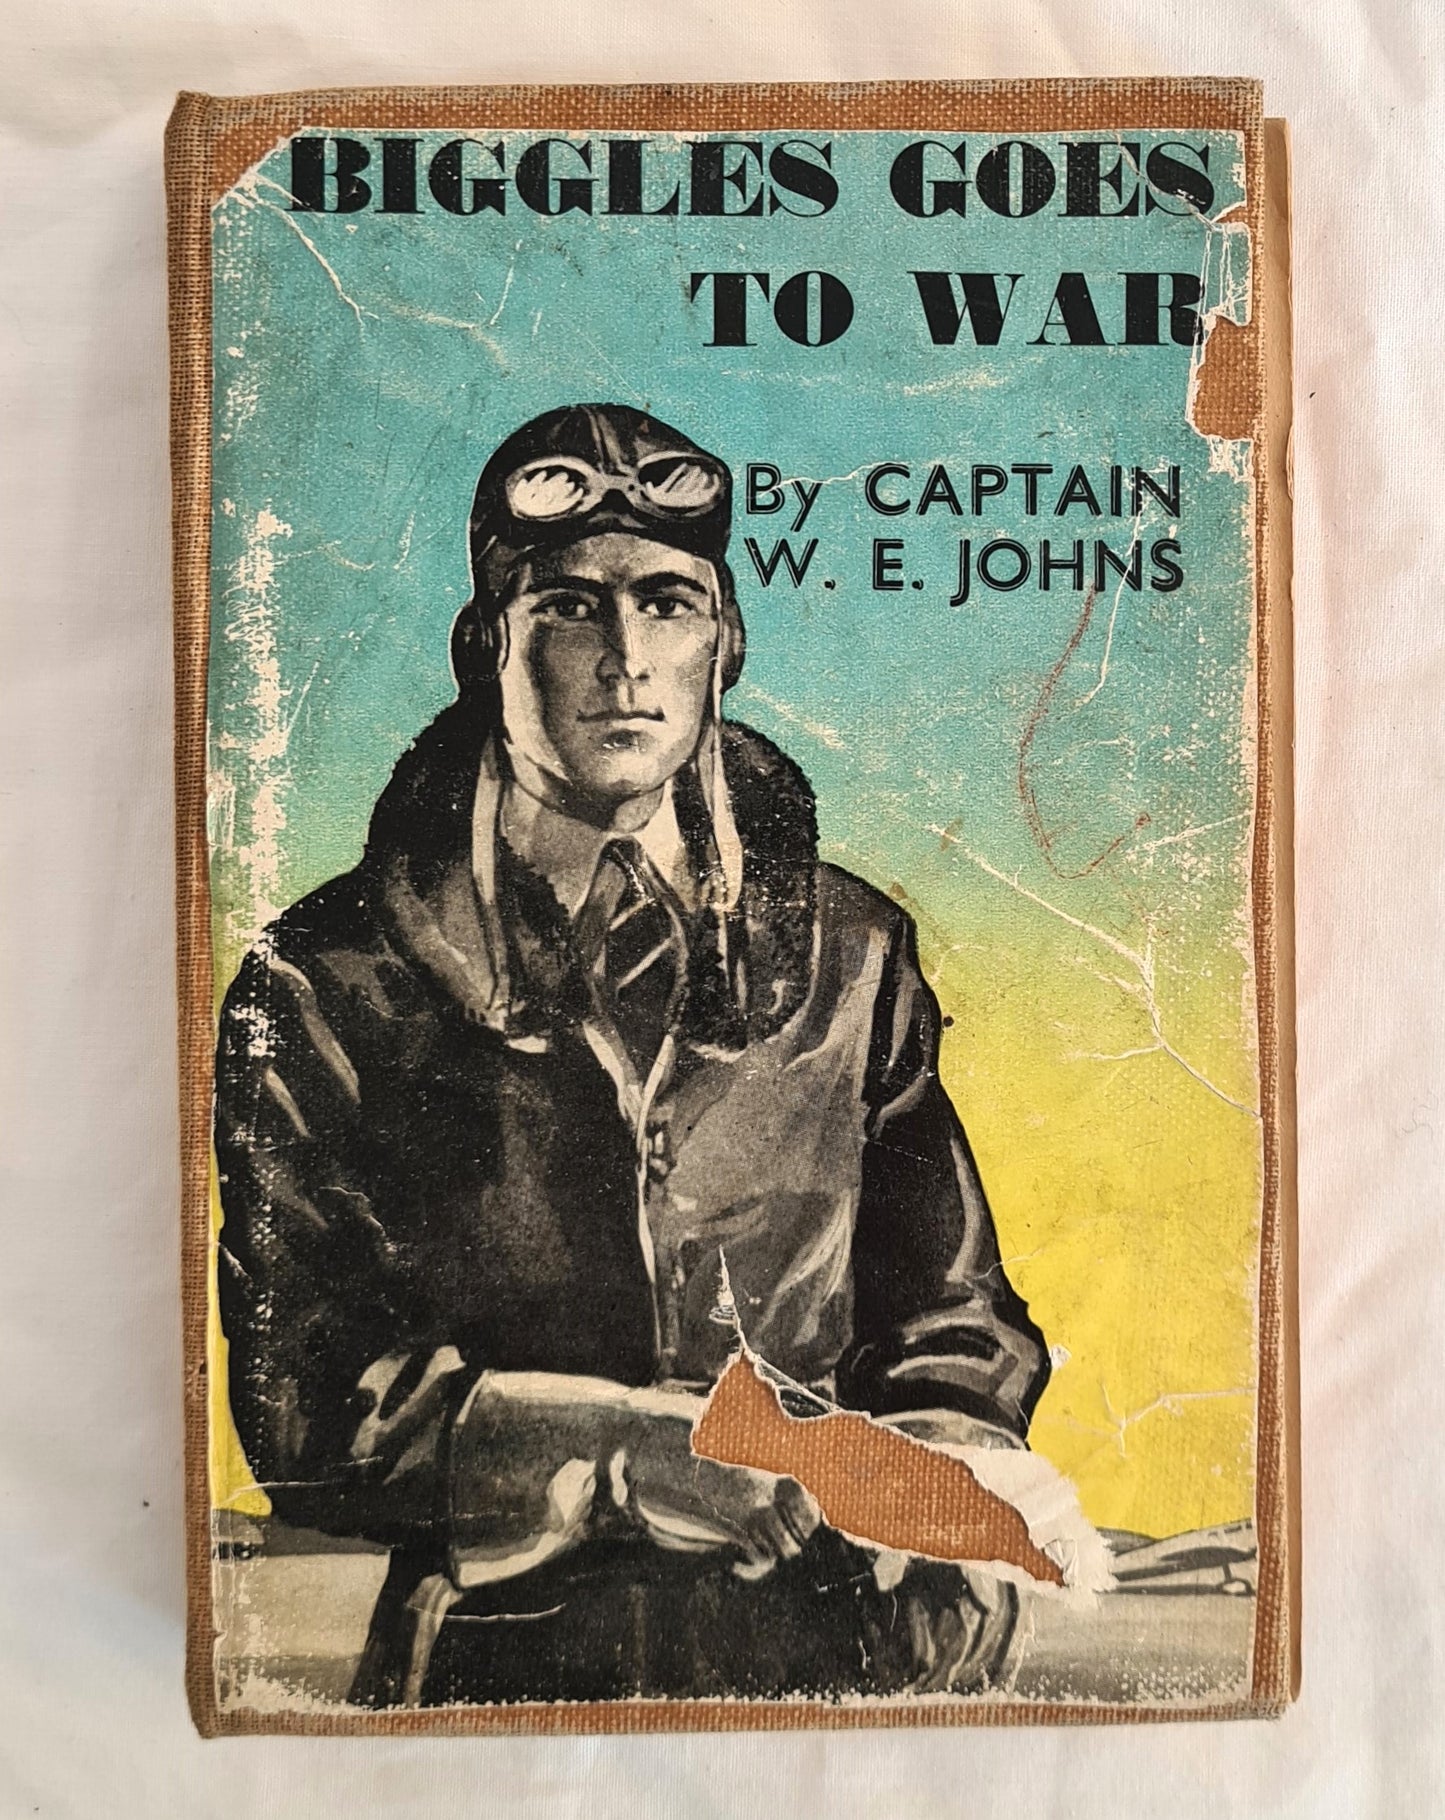 Biggles Goes to War  by Captain W. E. Johns  illustrated by Martin Tyas